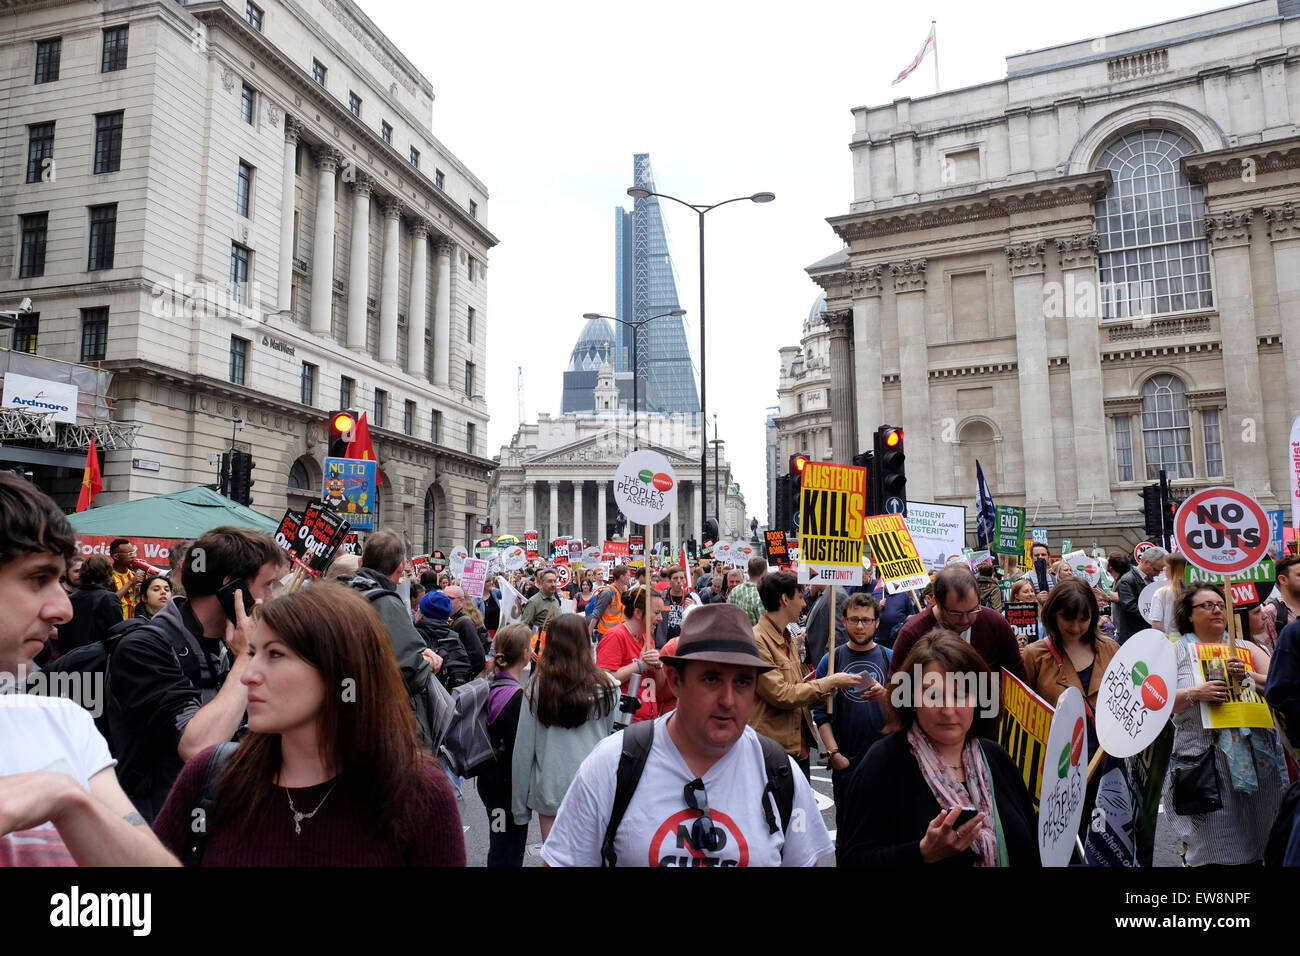 Protesters against austerity in the city of London Stock Photo